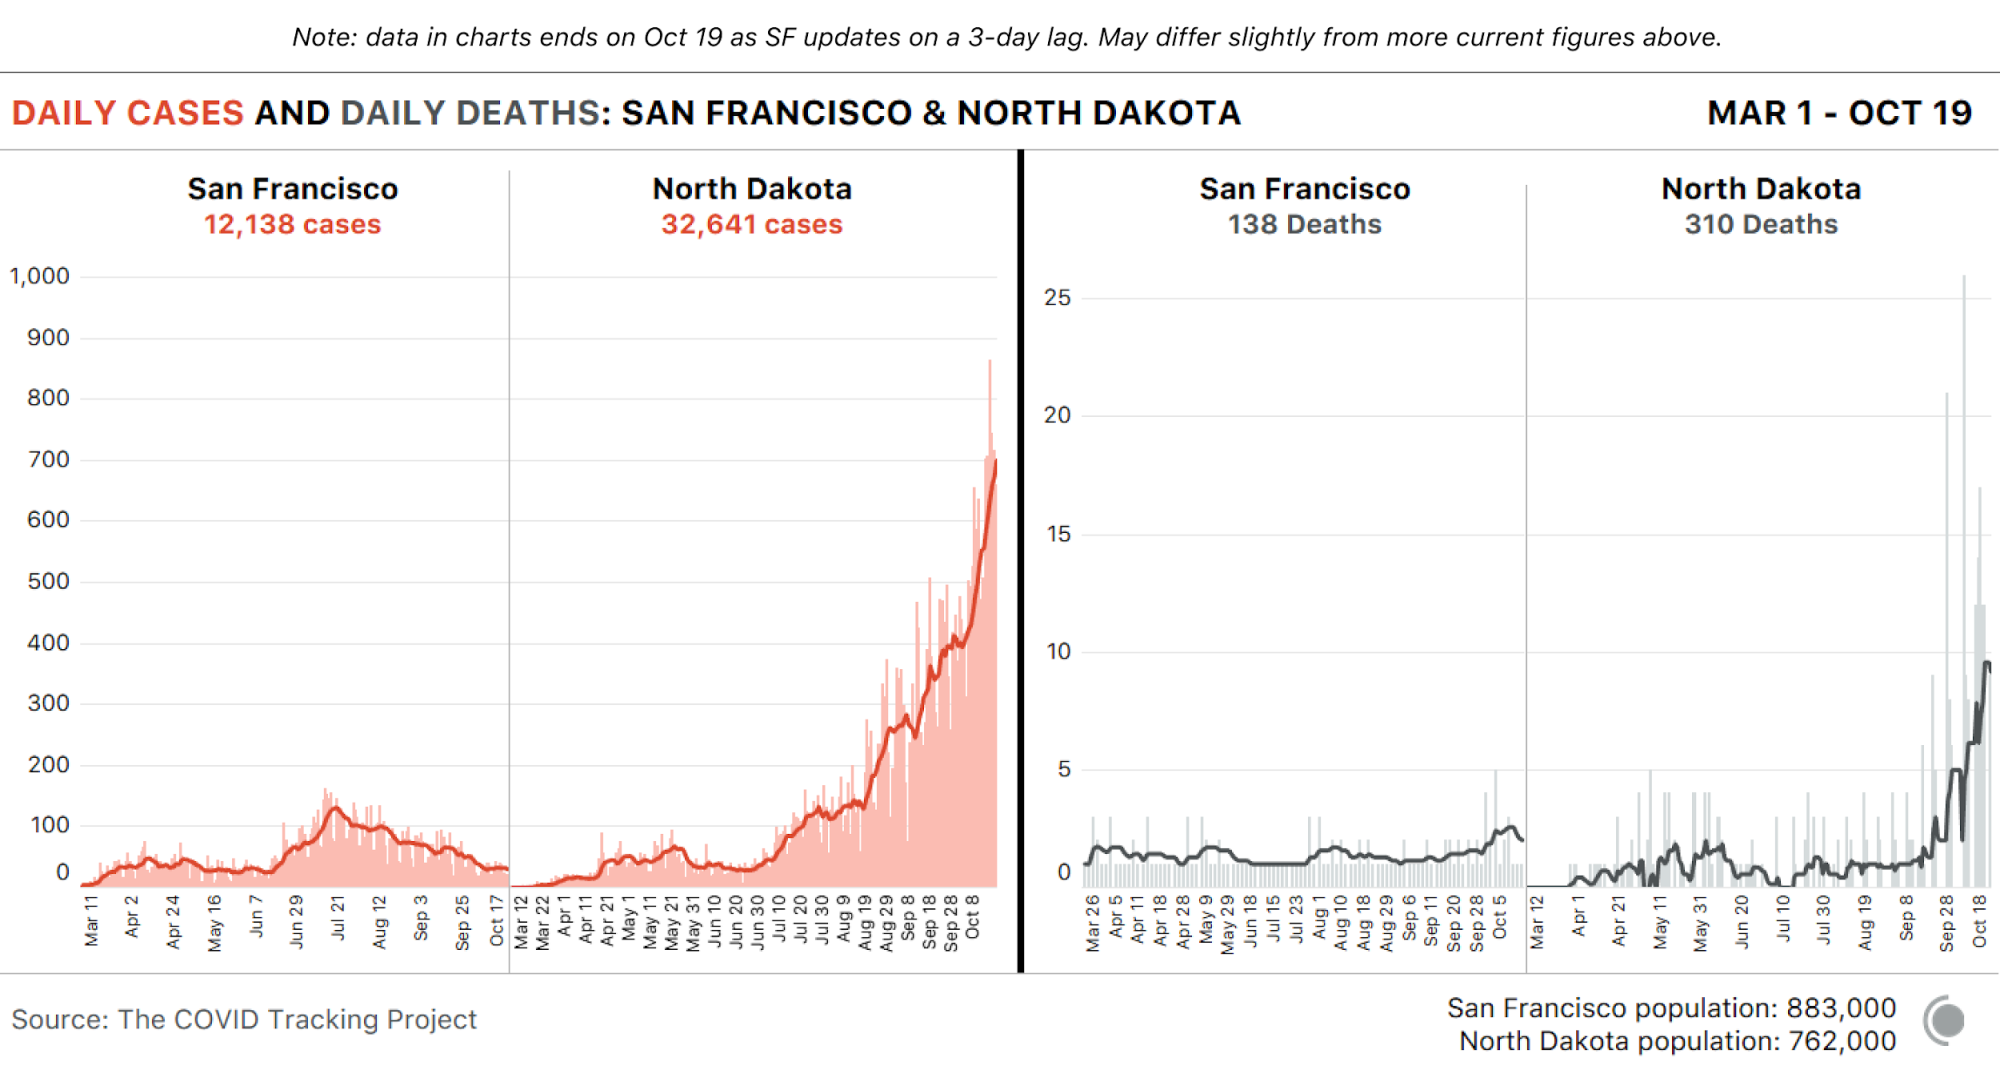 Charts comparing San Francisco COVID-19 cases and deaths to the same metrics in North Dakota. North Dakota has about 2.7x more cases and 2.2x more deaths. The populations are roughly similar.